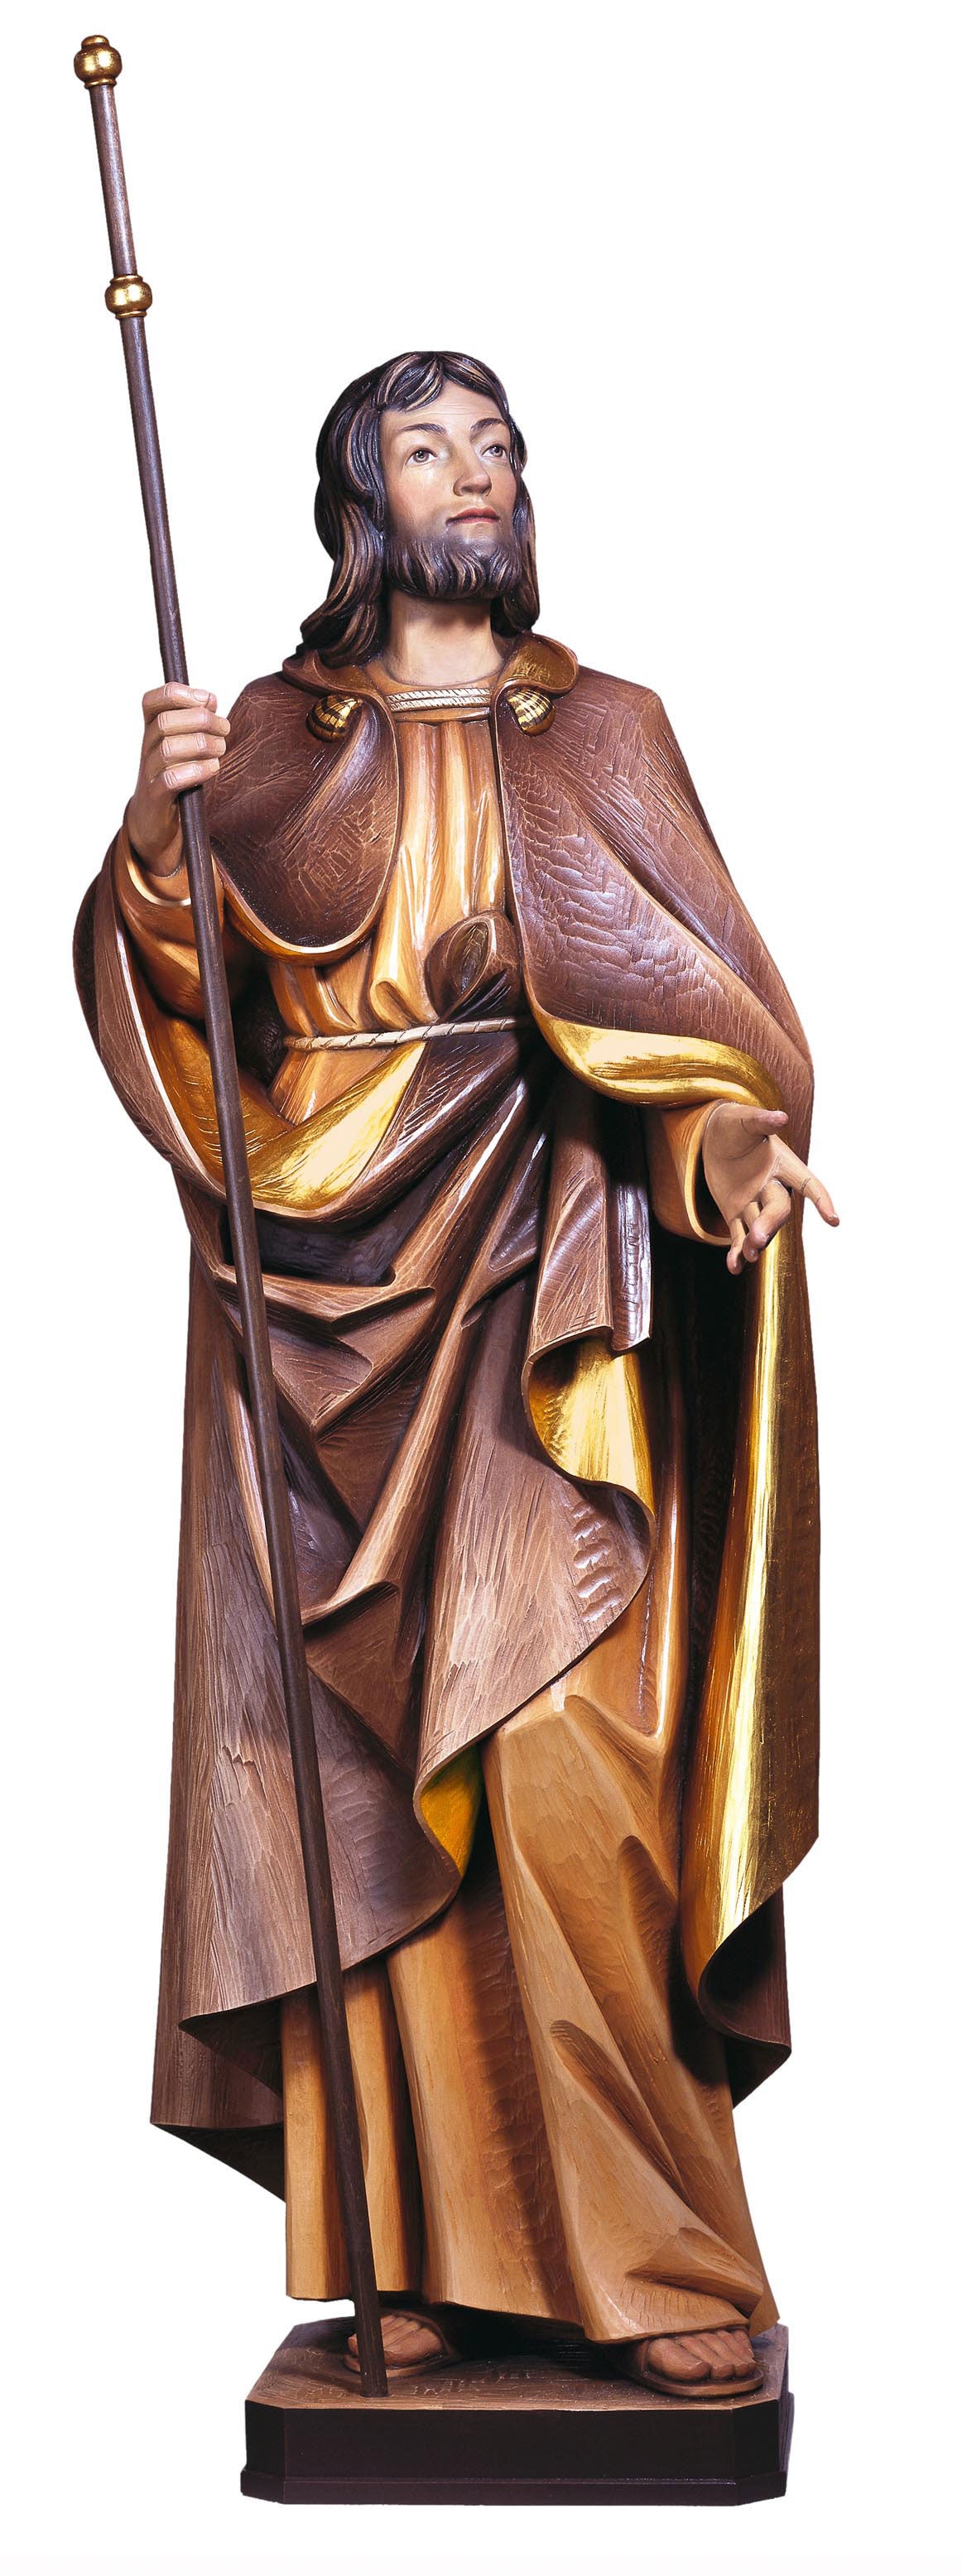 st-james-the-greater-the-apostle-statue-500-6.jpg